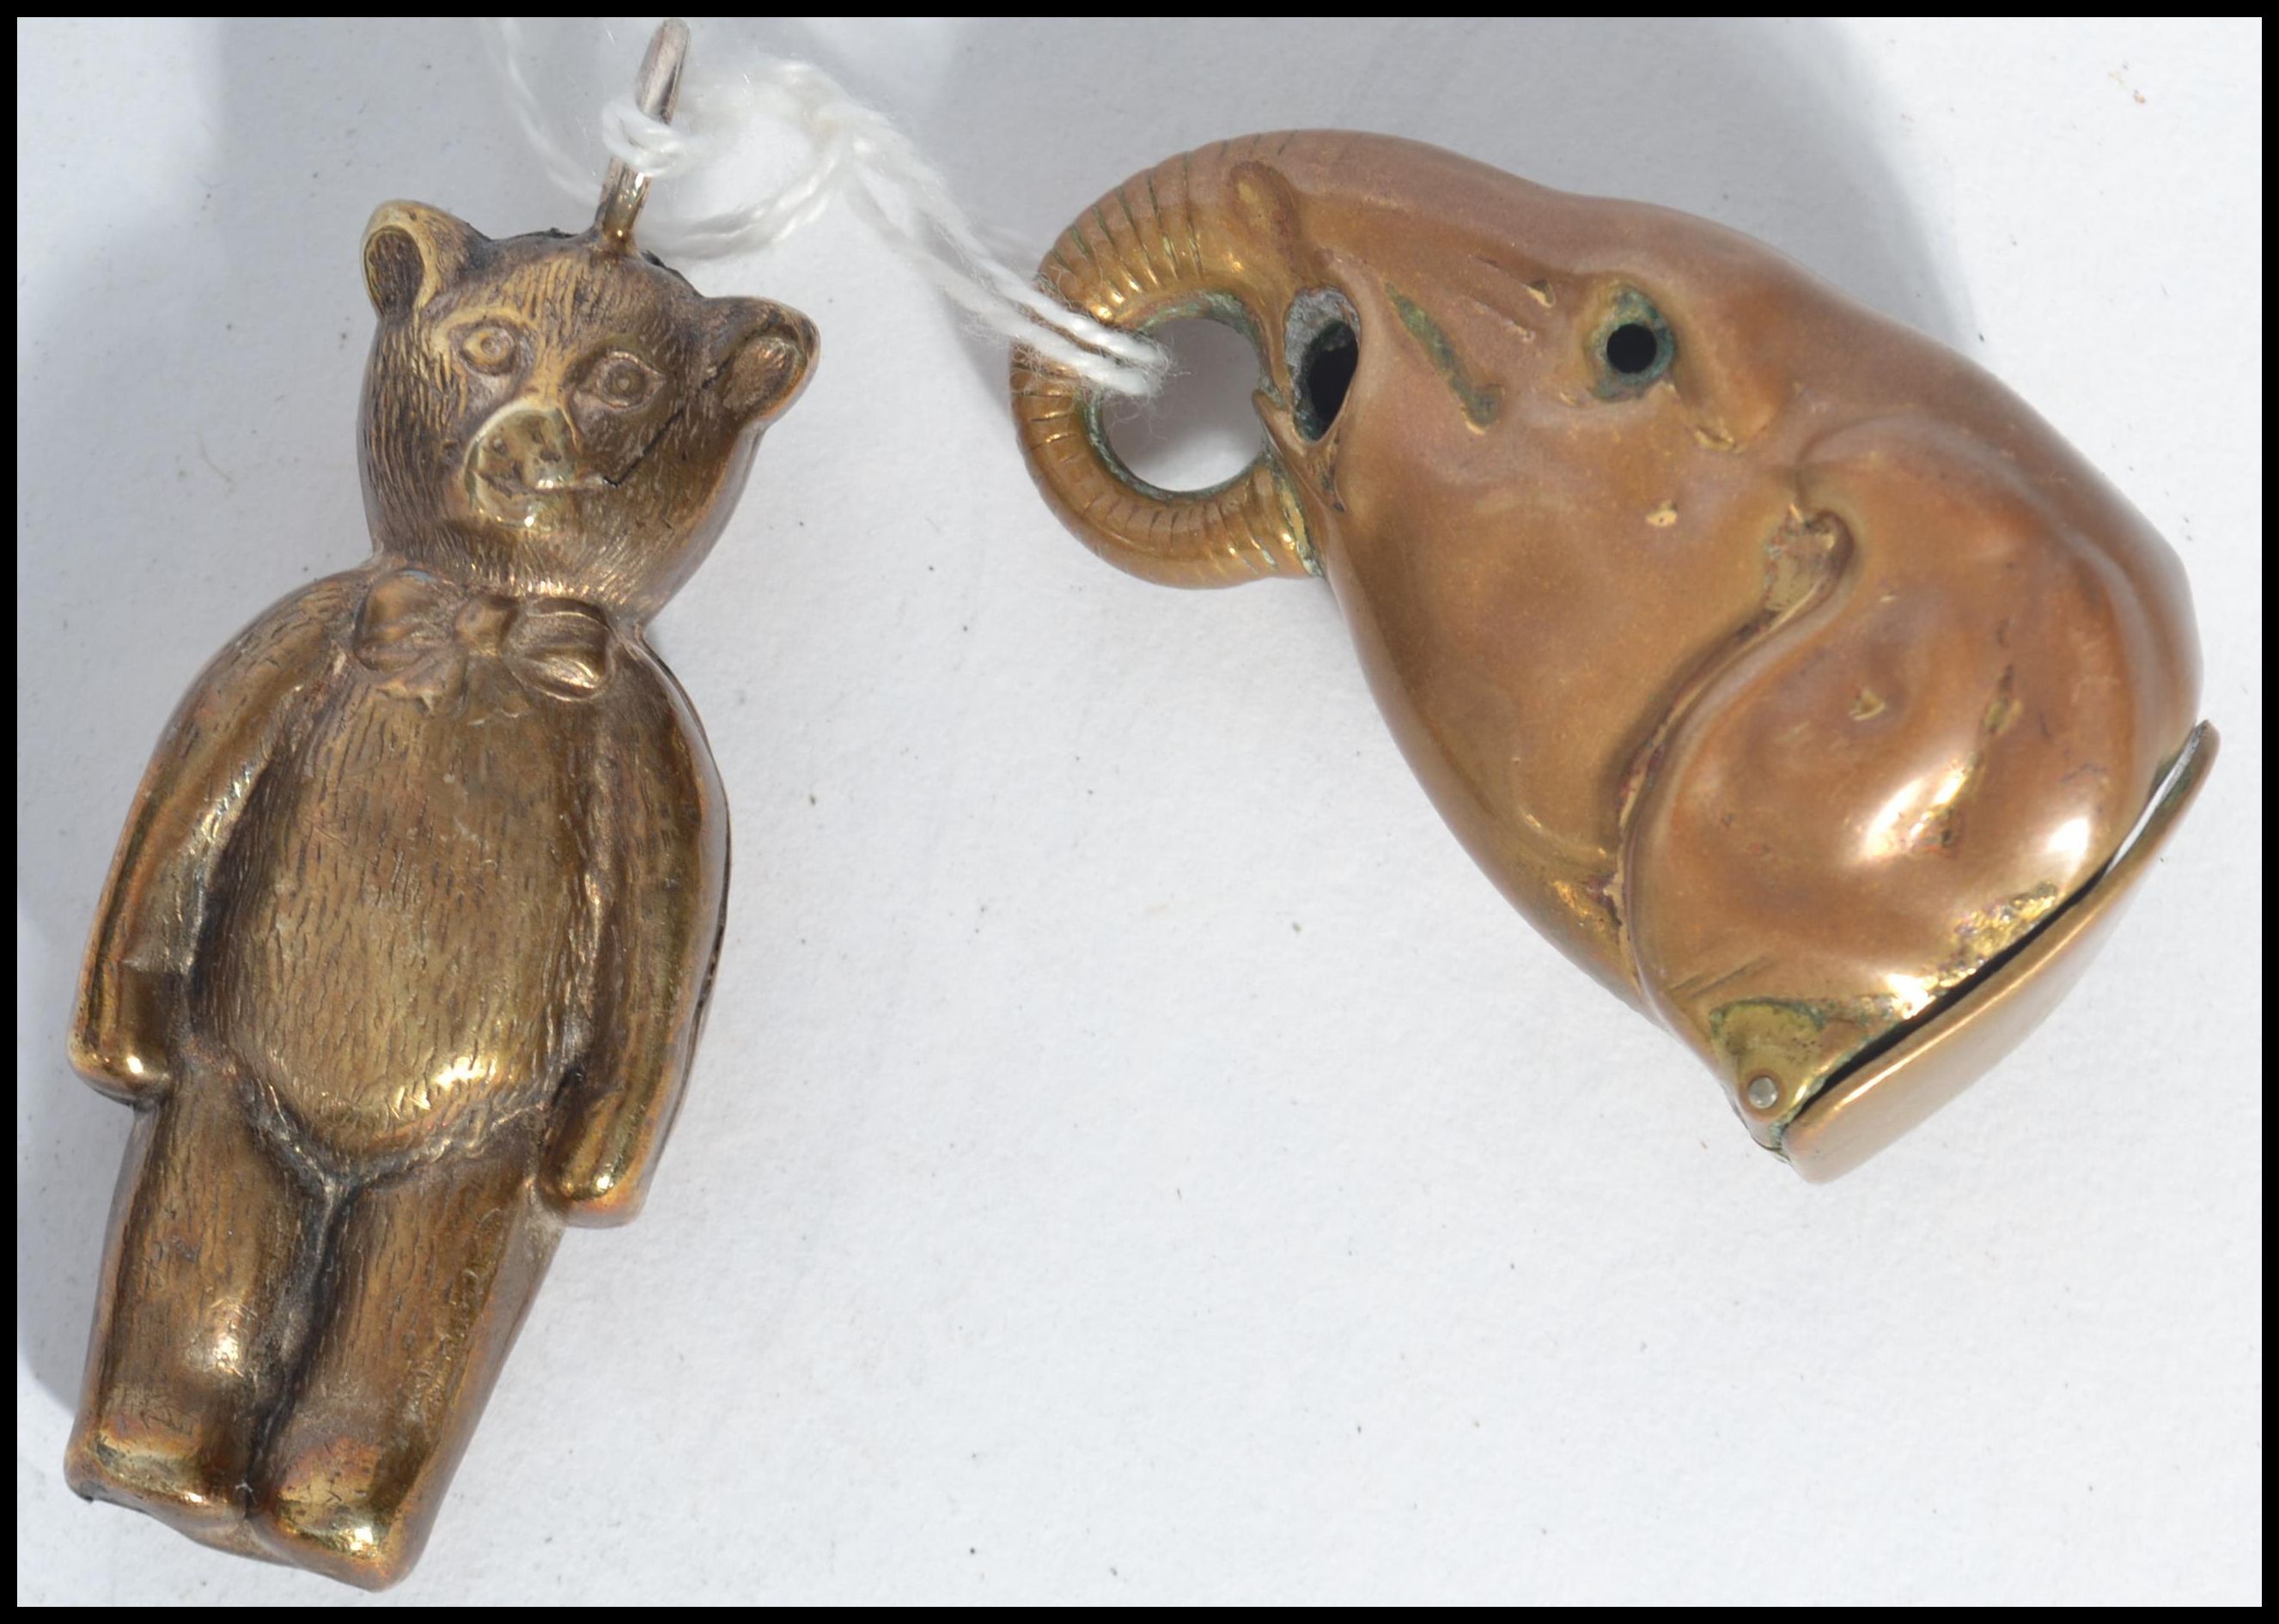 Two vintage brass novelty items one being a baby's rattle in the form of a teddy bear , and the